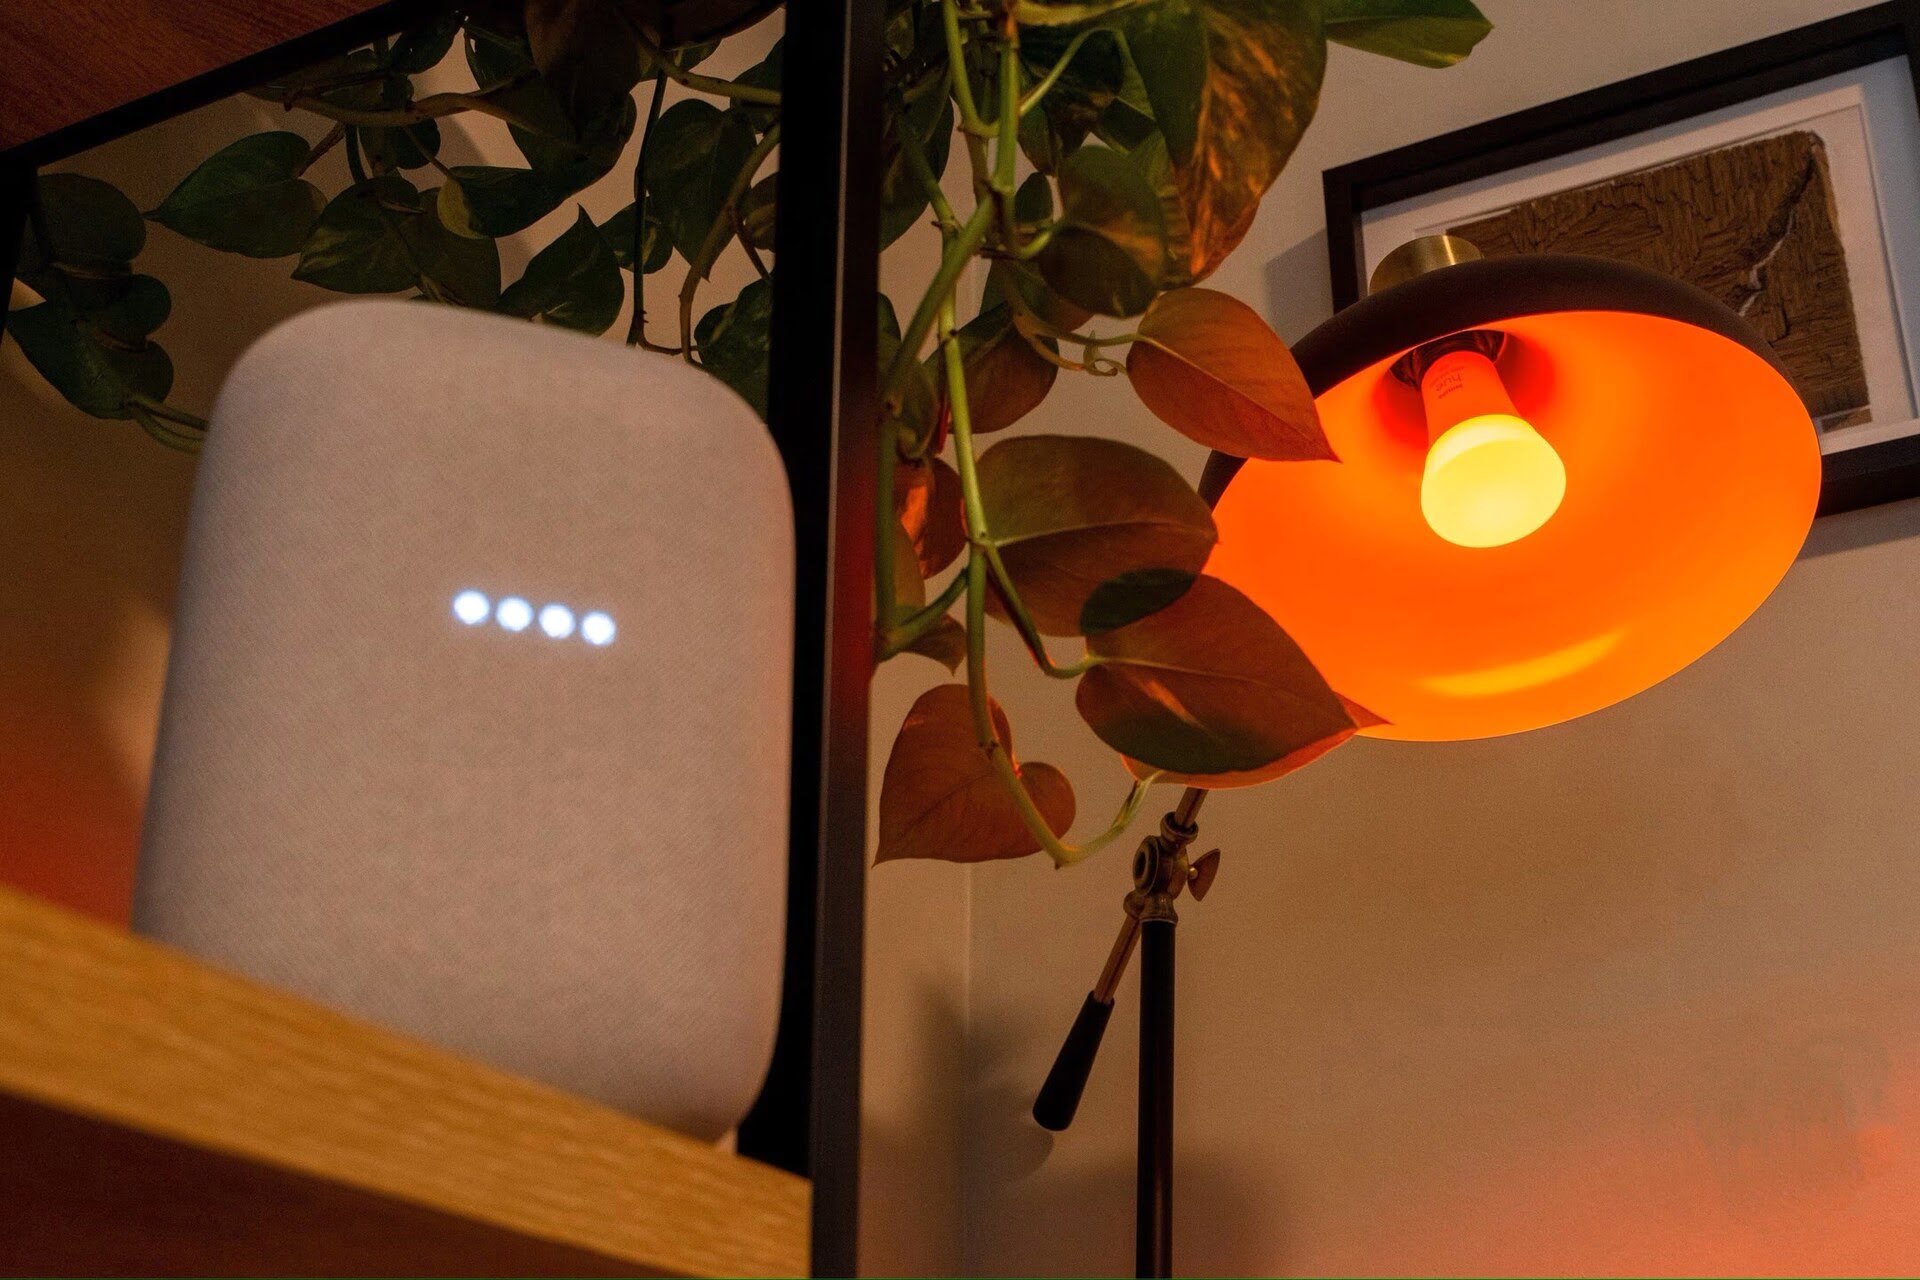 How To Connect Philips Hue To Google Home Without Bridge